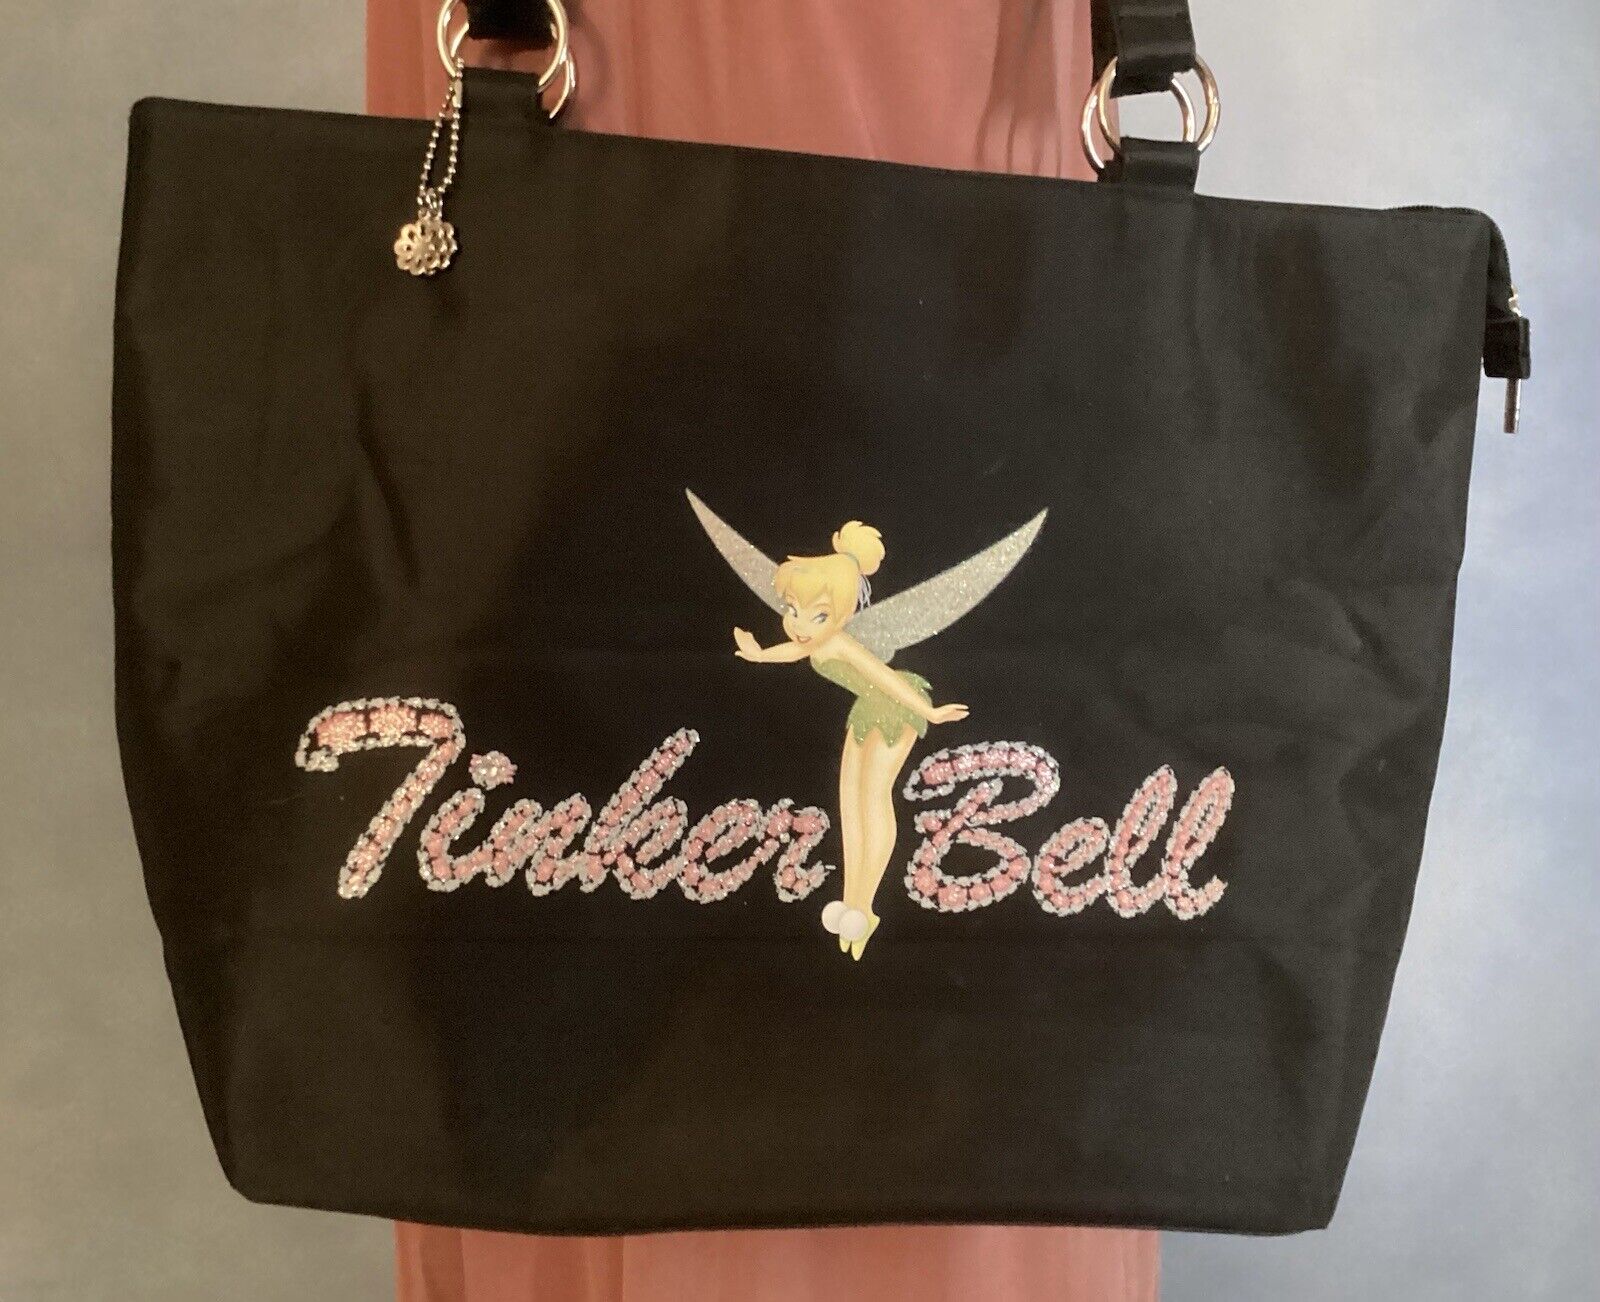 New Without Tags - Disney Tinker Bell Shoulder Tote Bag Purse Black